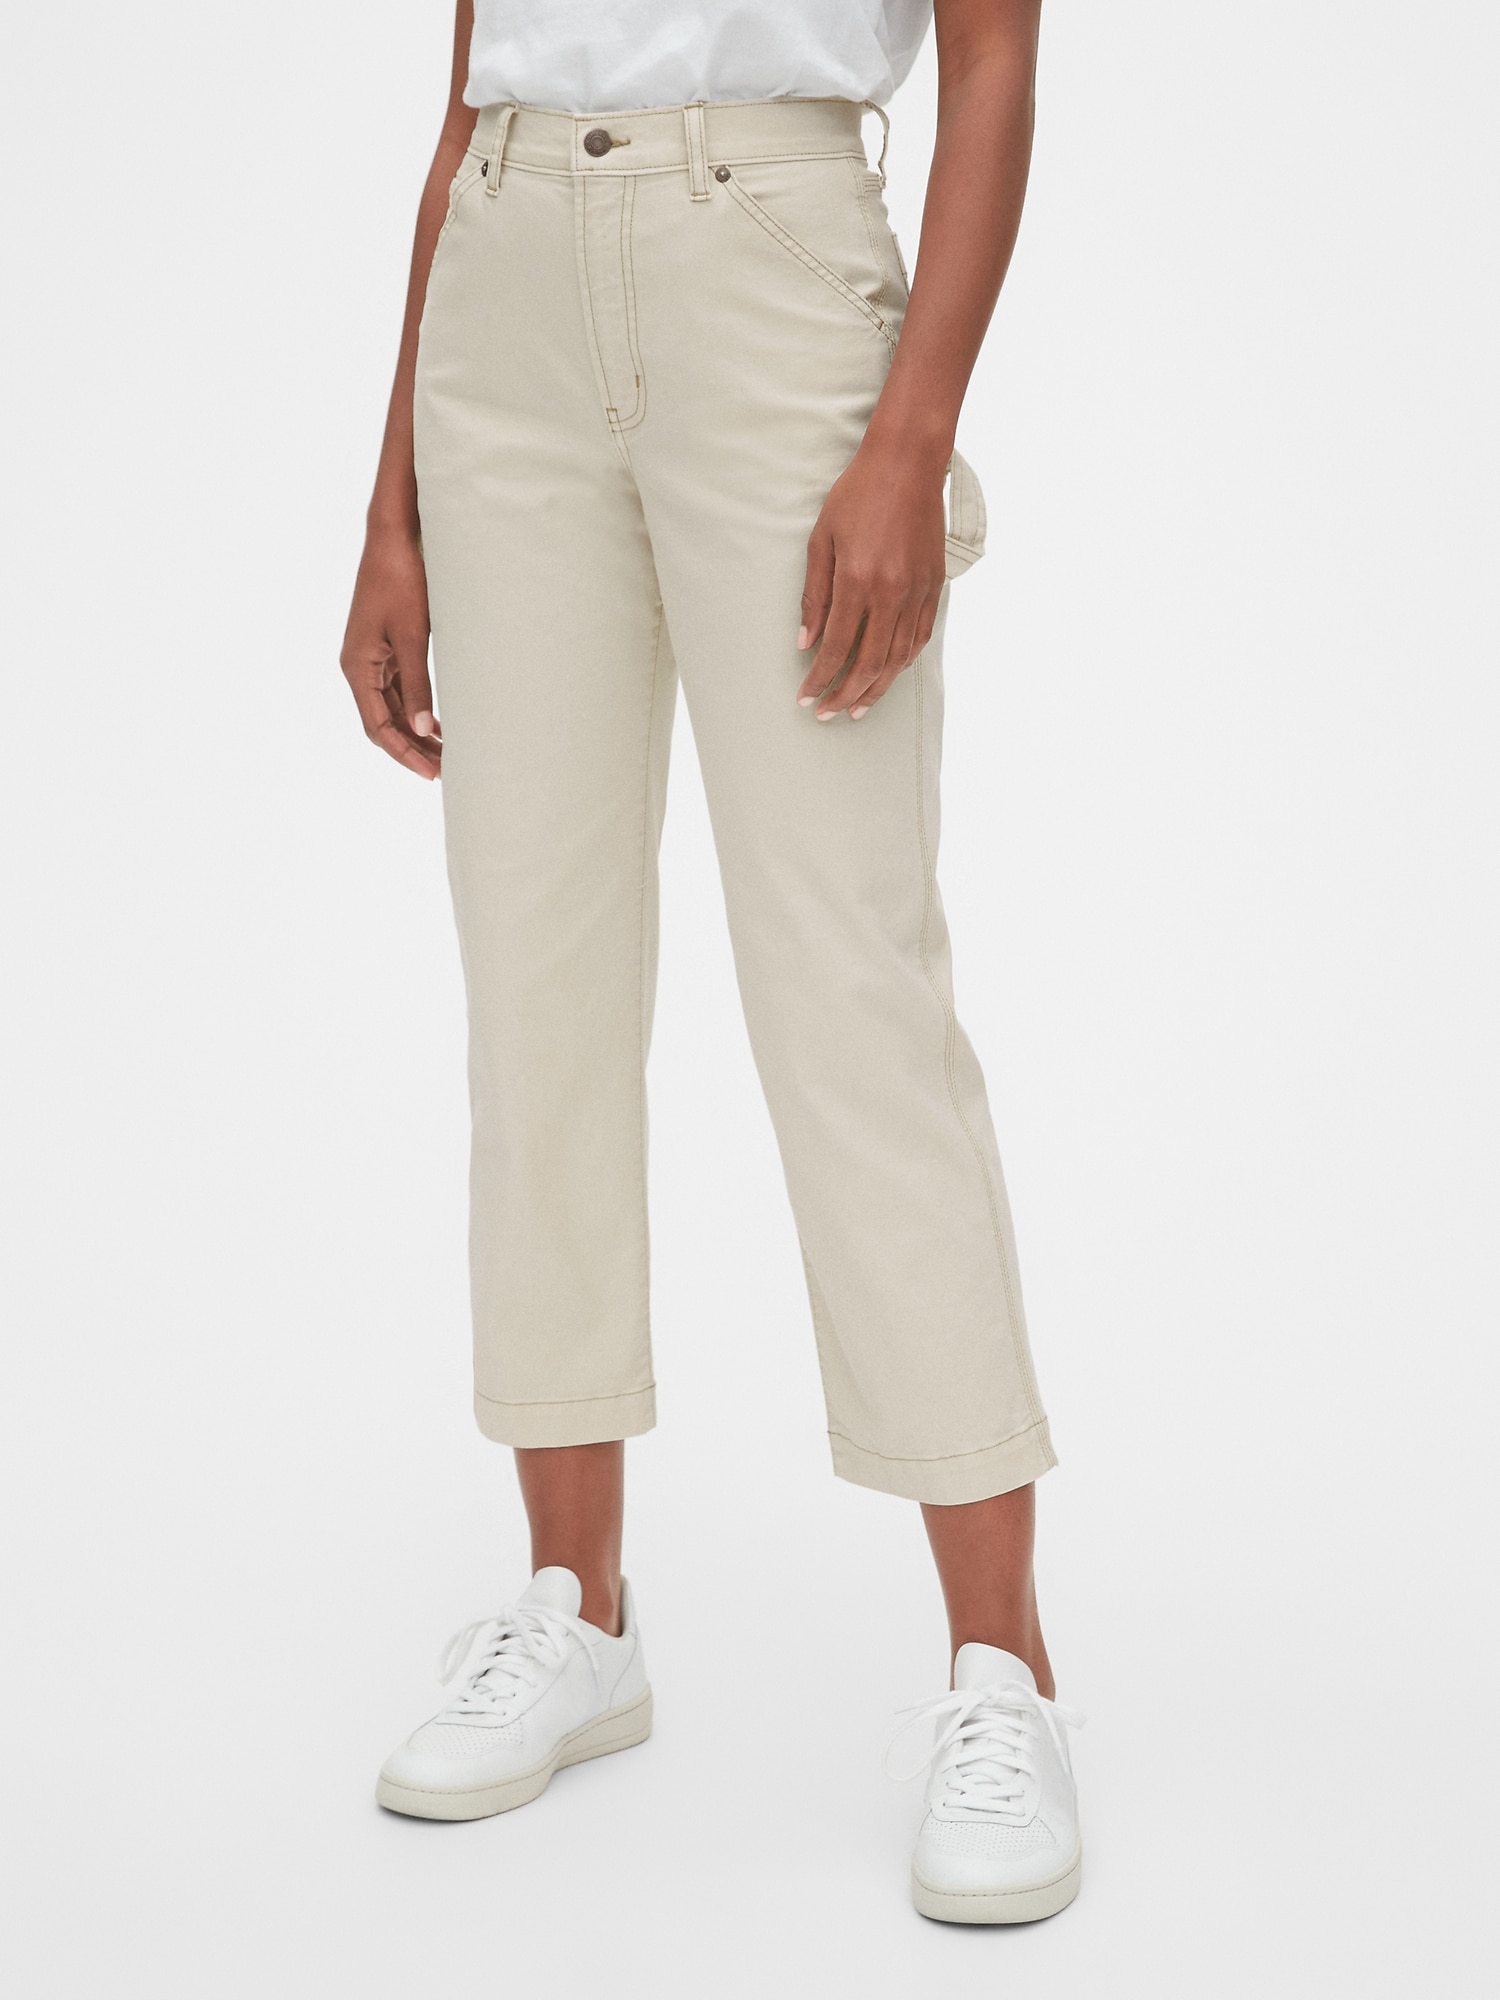 Gap Women's Pants On Sale Up To 90% Off Retail | thredUP